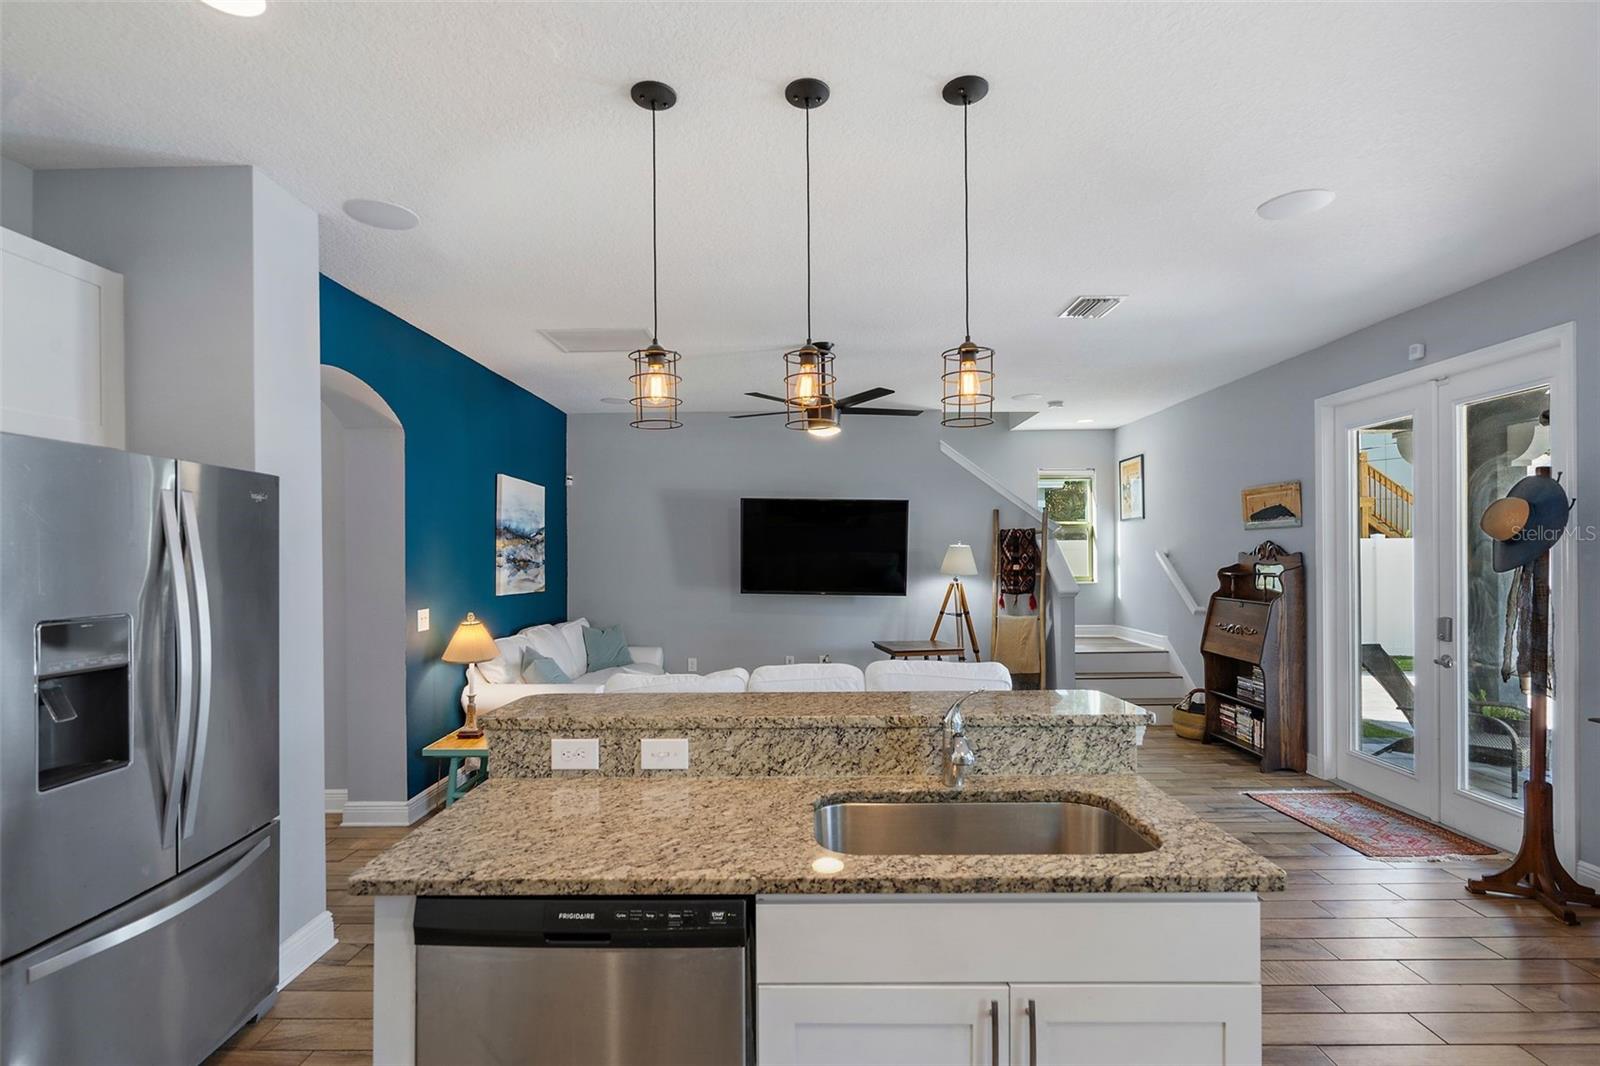 Kitchen has all the modern conveniences, plus an ideal open floor plan and center island.